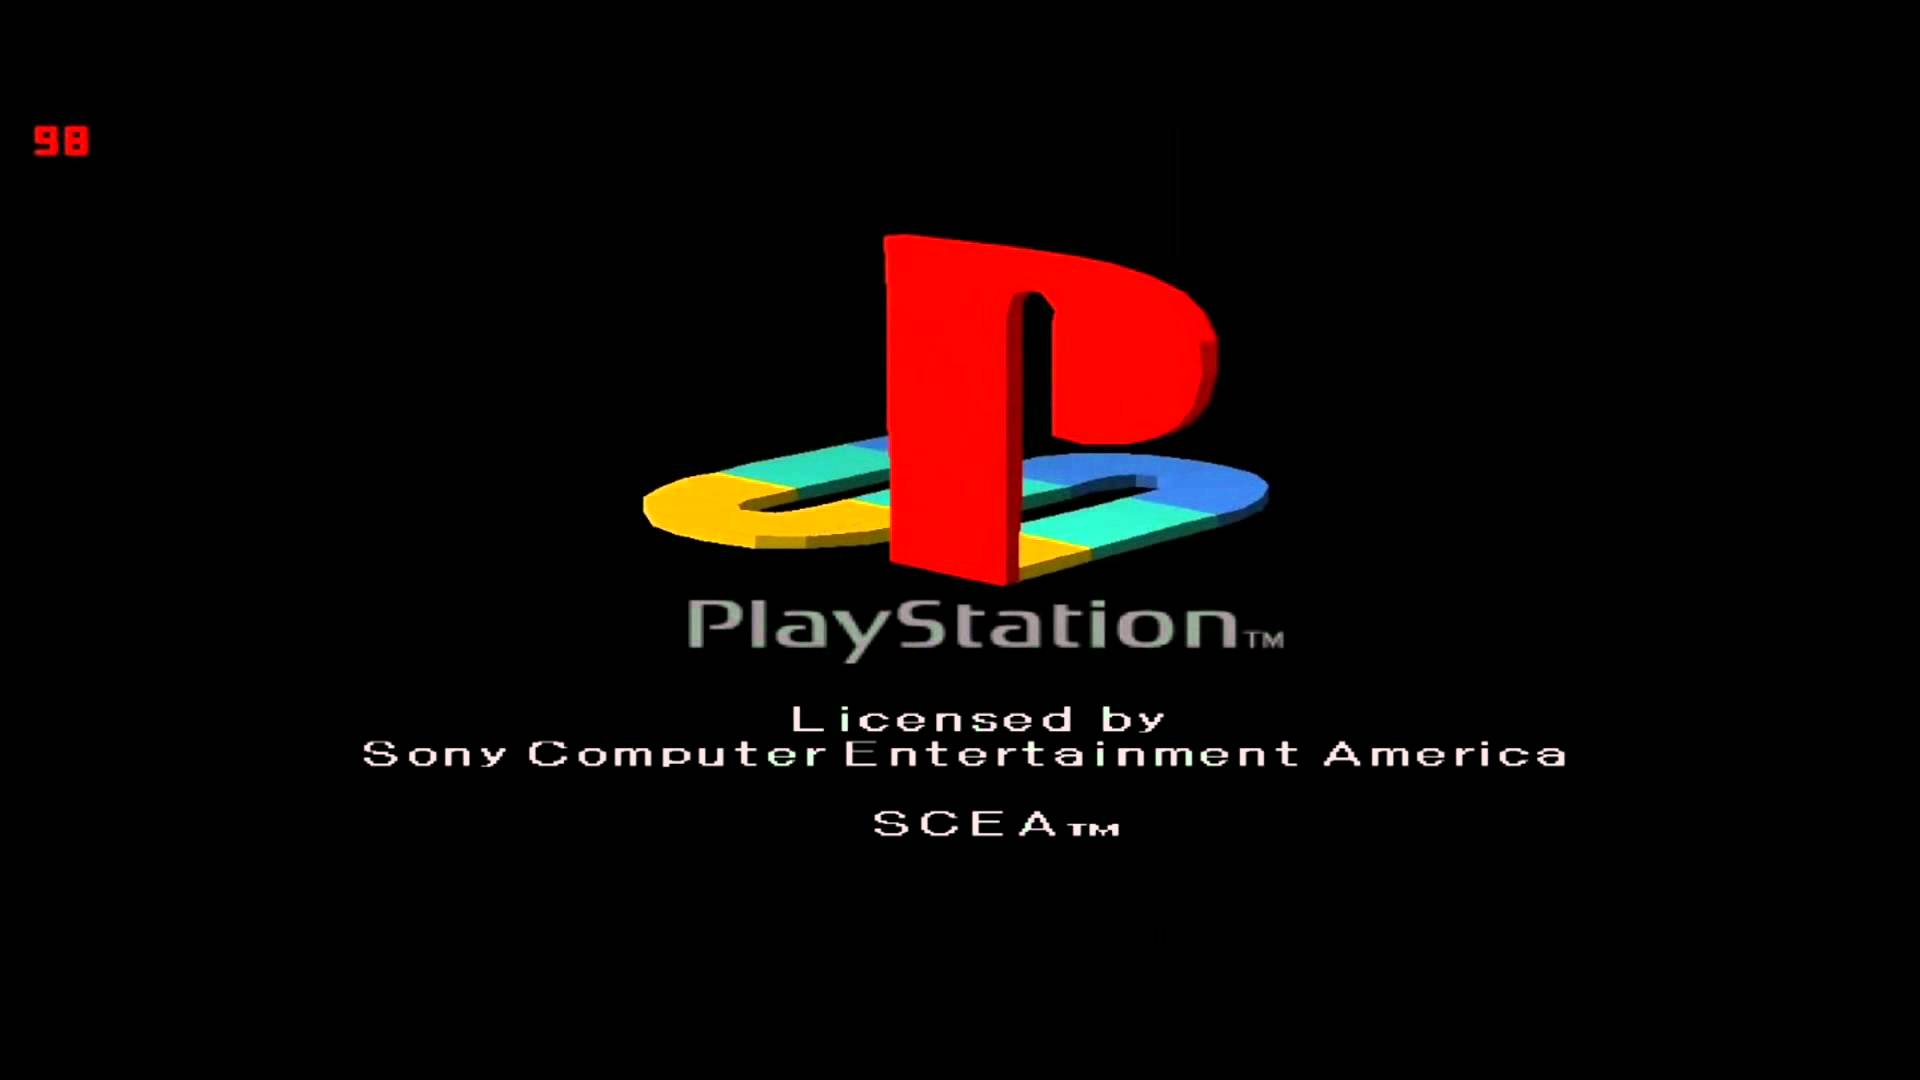 The Most Eargasmic Sound Ever Created (Playstation 1 Startup)